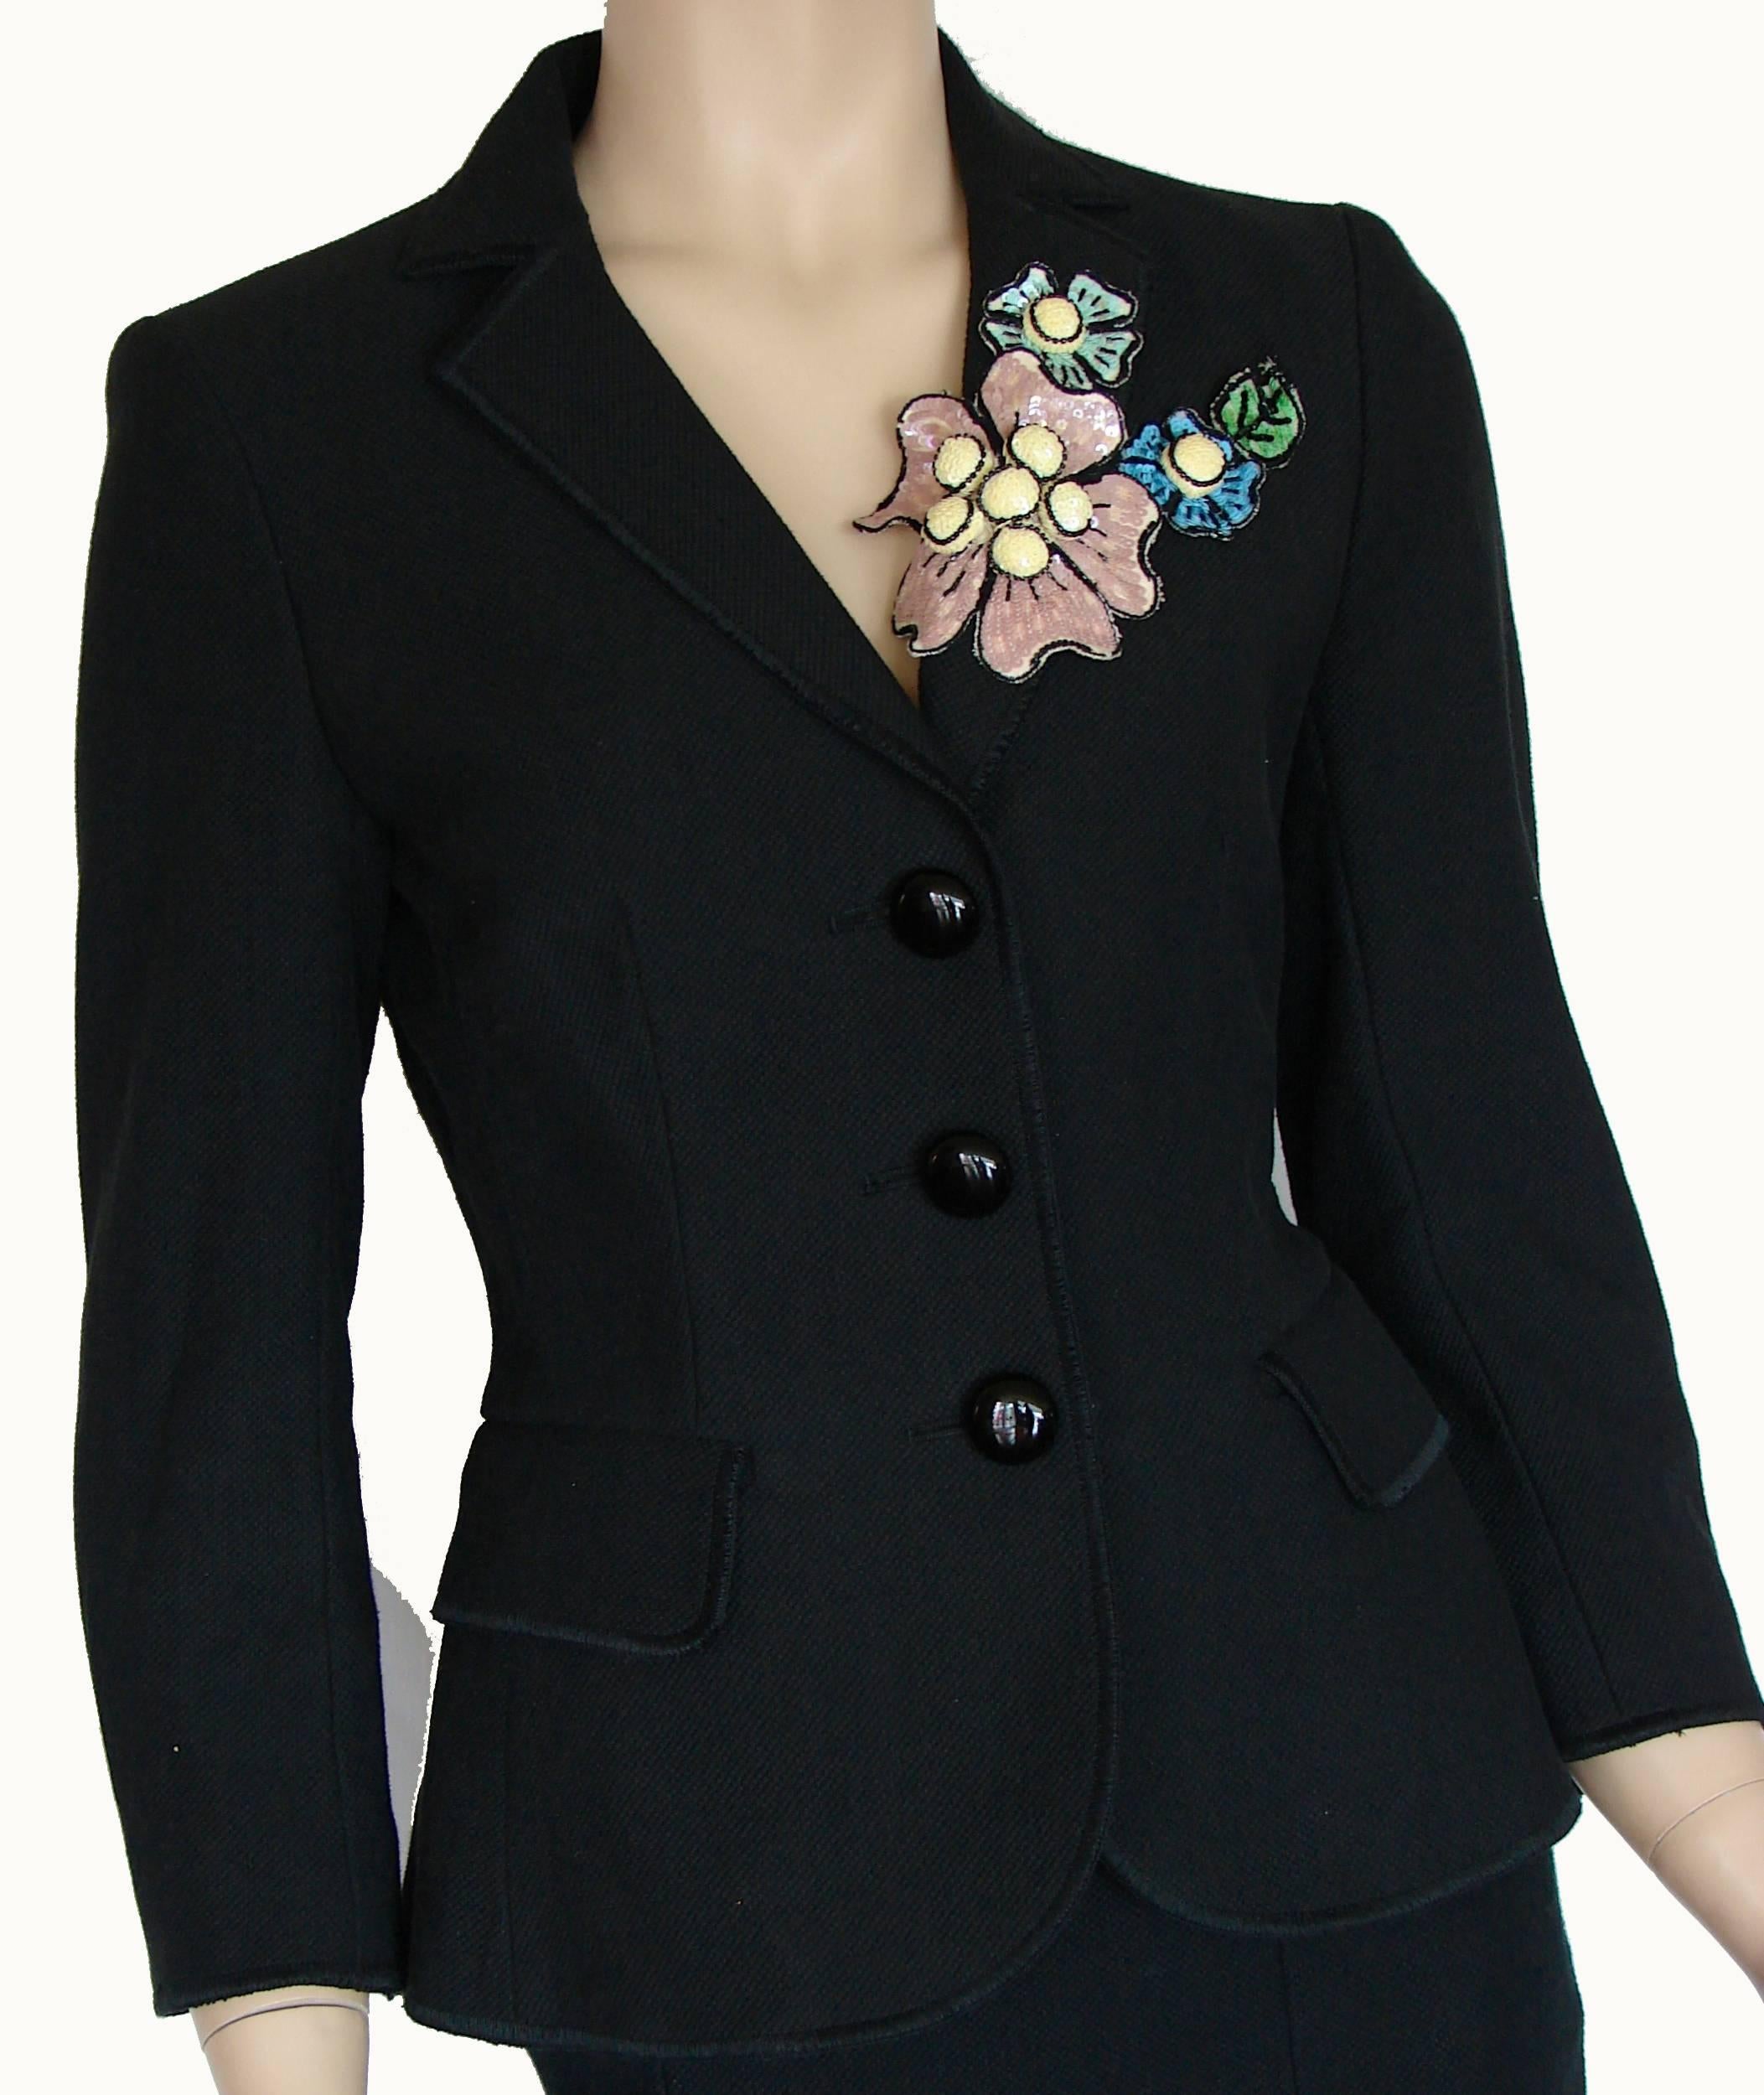 Moschino Cheap & Chic Black Jacket & Skirt Suit Sequin Corsage US Size 4/6 In Excellent Condition In Port Saint Lucie, FL